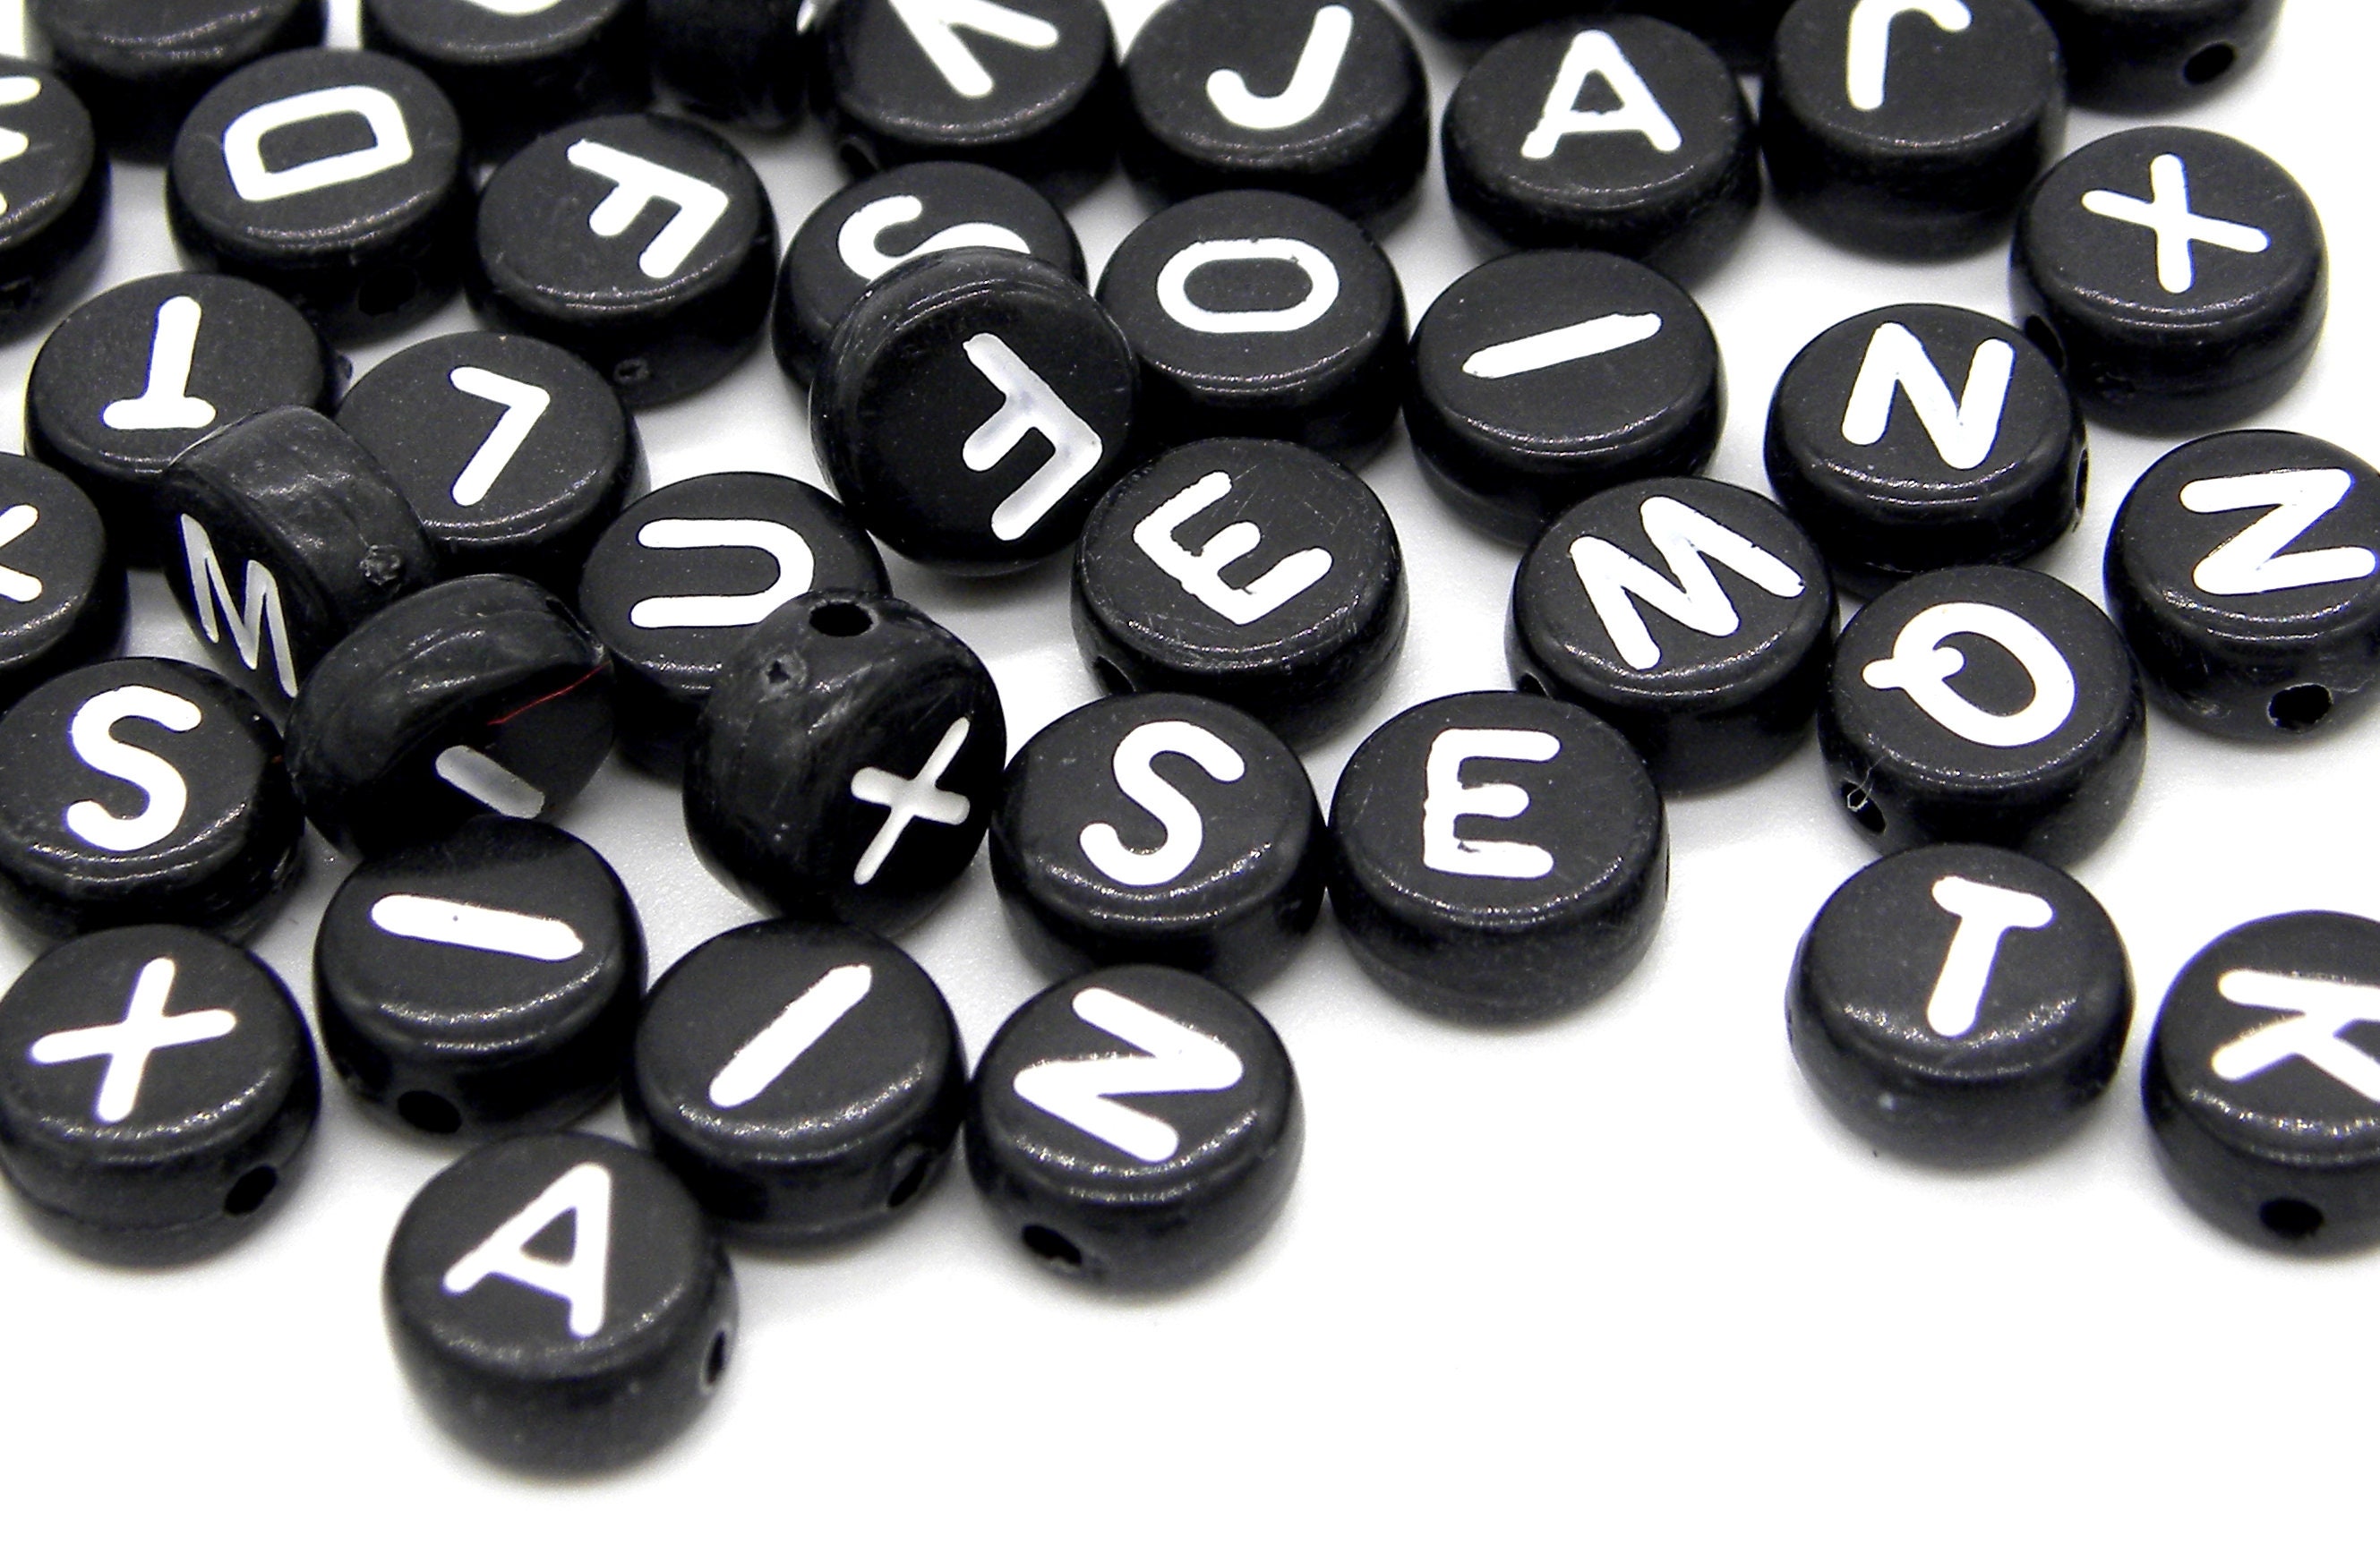 The Beadery - Black Alphabet Beads with White Letters - 360 Pieces, Unisex